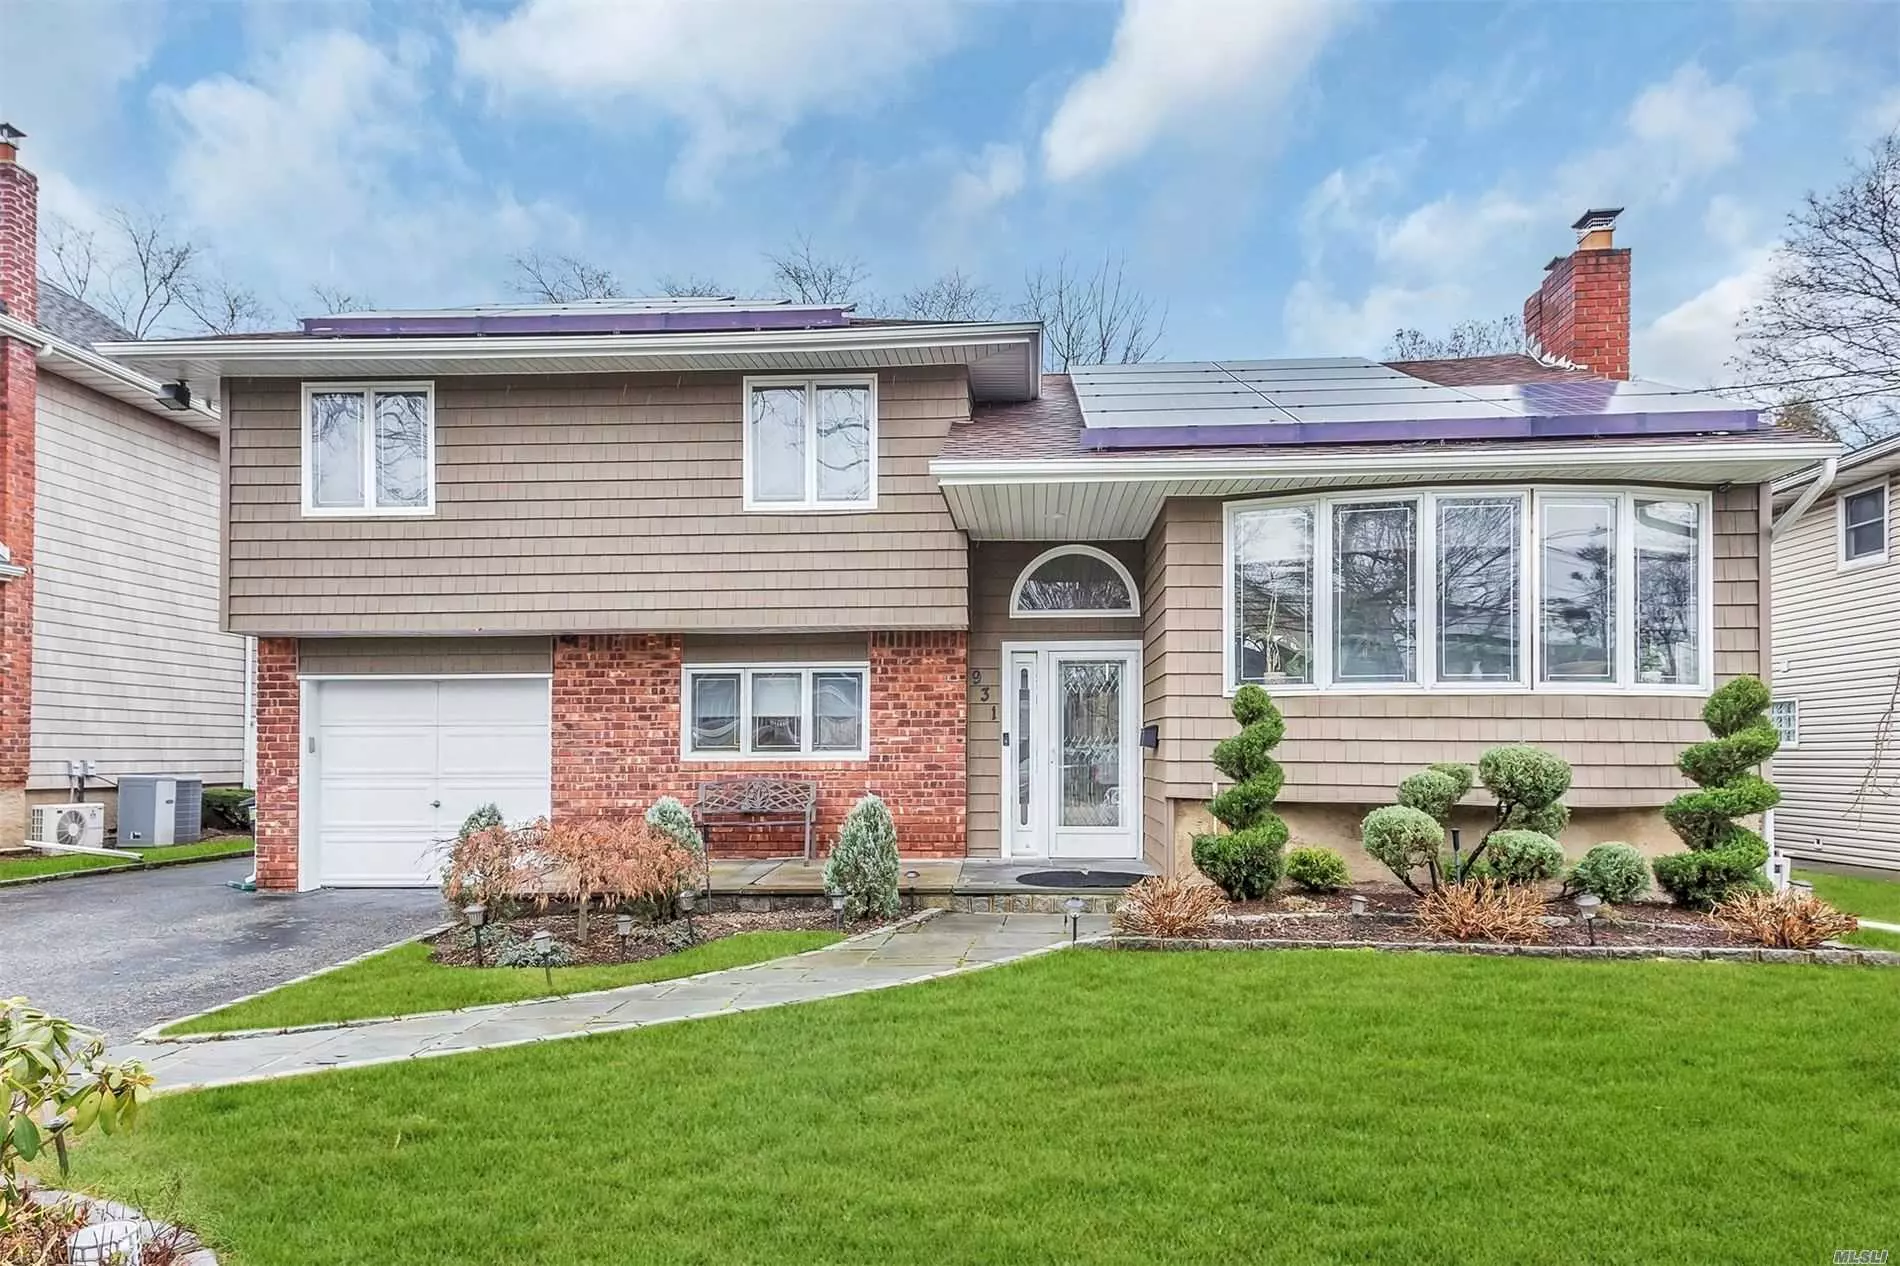 Unbelievably pried! Beautiful 4 level 3 bdrm 2 bath move-in condition Old Britton split! Living Rm w/gas fireplace. Updated Vaulted kitchen w/skylights, updated bath, Roof - approx 7 yrs, Electric, Approx 3 yrs, Heating system 2007, Siding 2019, pool heater, heat pump, 6yrs, liner approx. 4 yrs. Windows & sliders approx. 4 yrs. hardwood floors, CAC, IGS, solar panels, Full basement. Beautifully landscaped. Won&rsquo;t Last